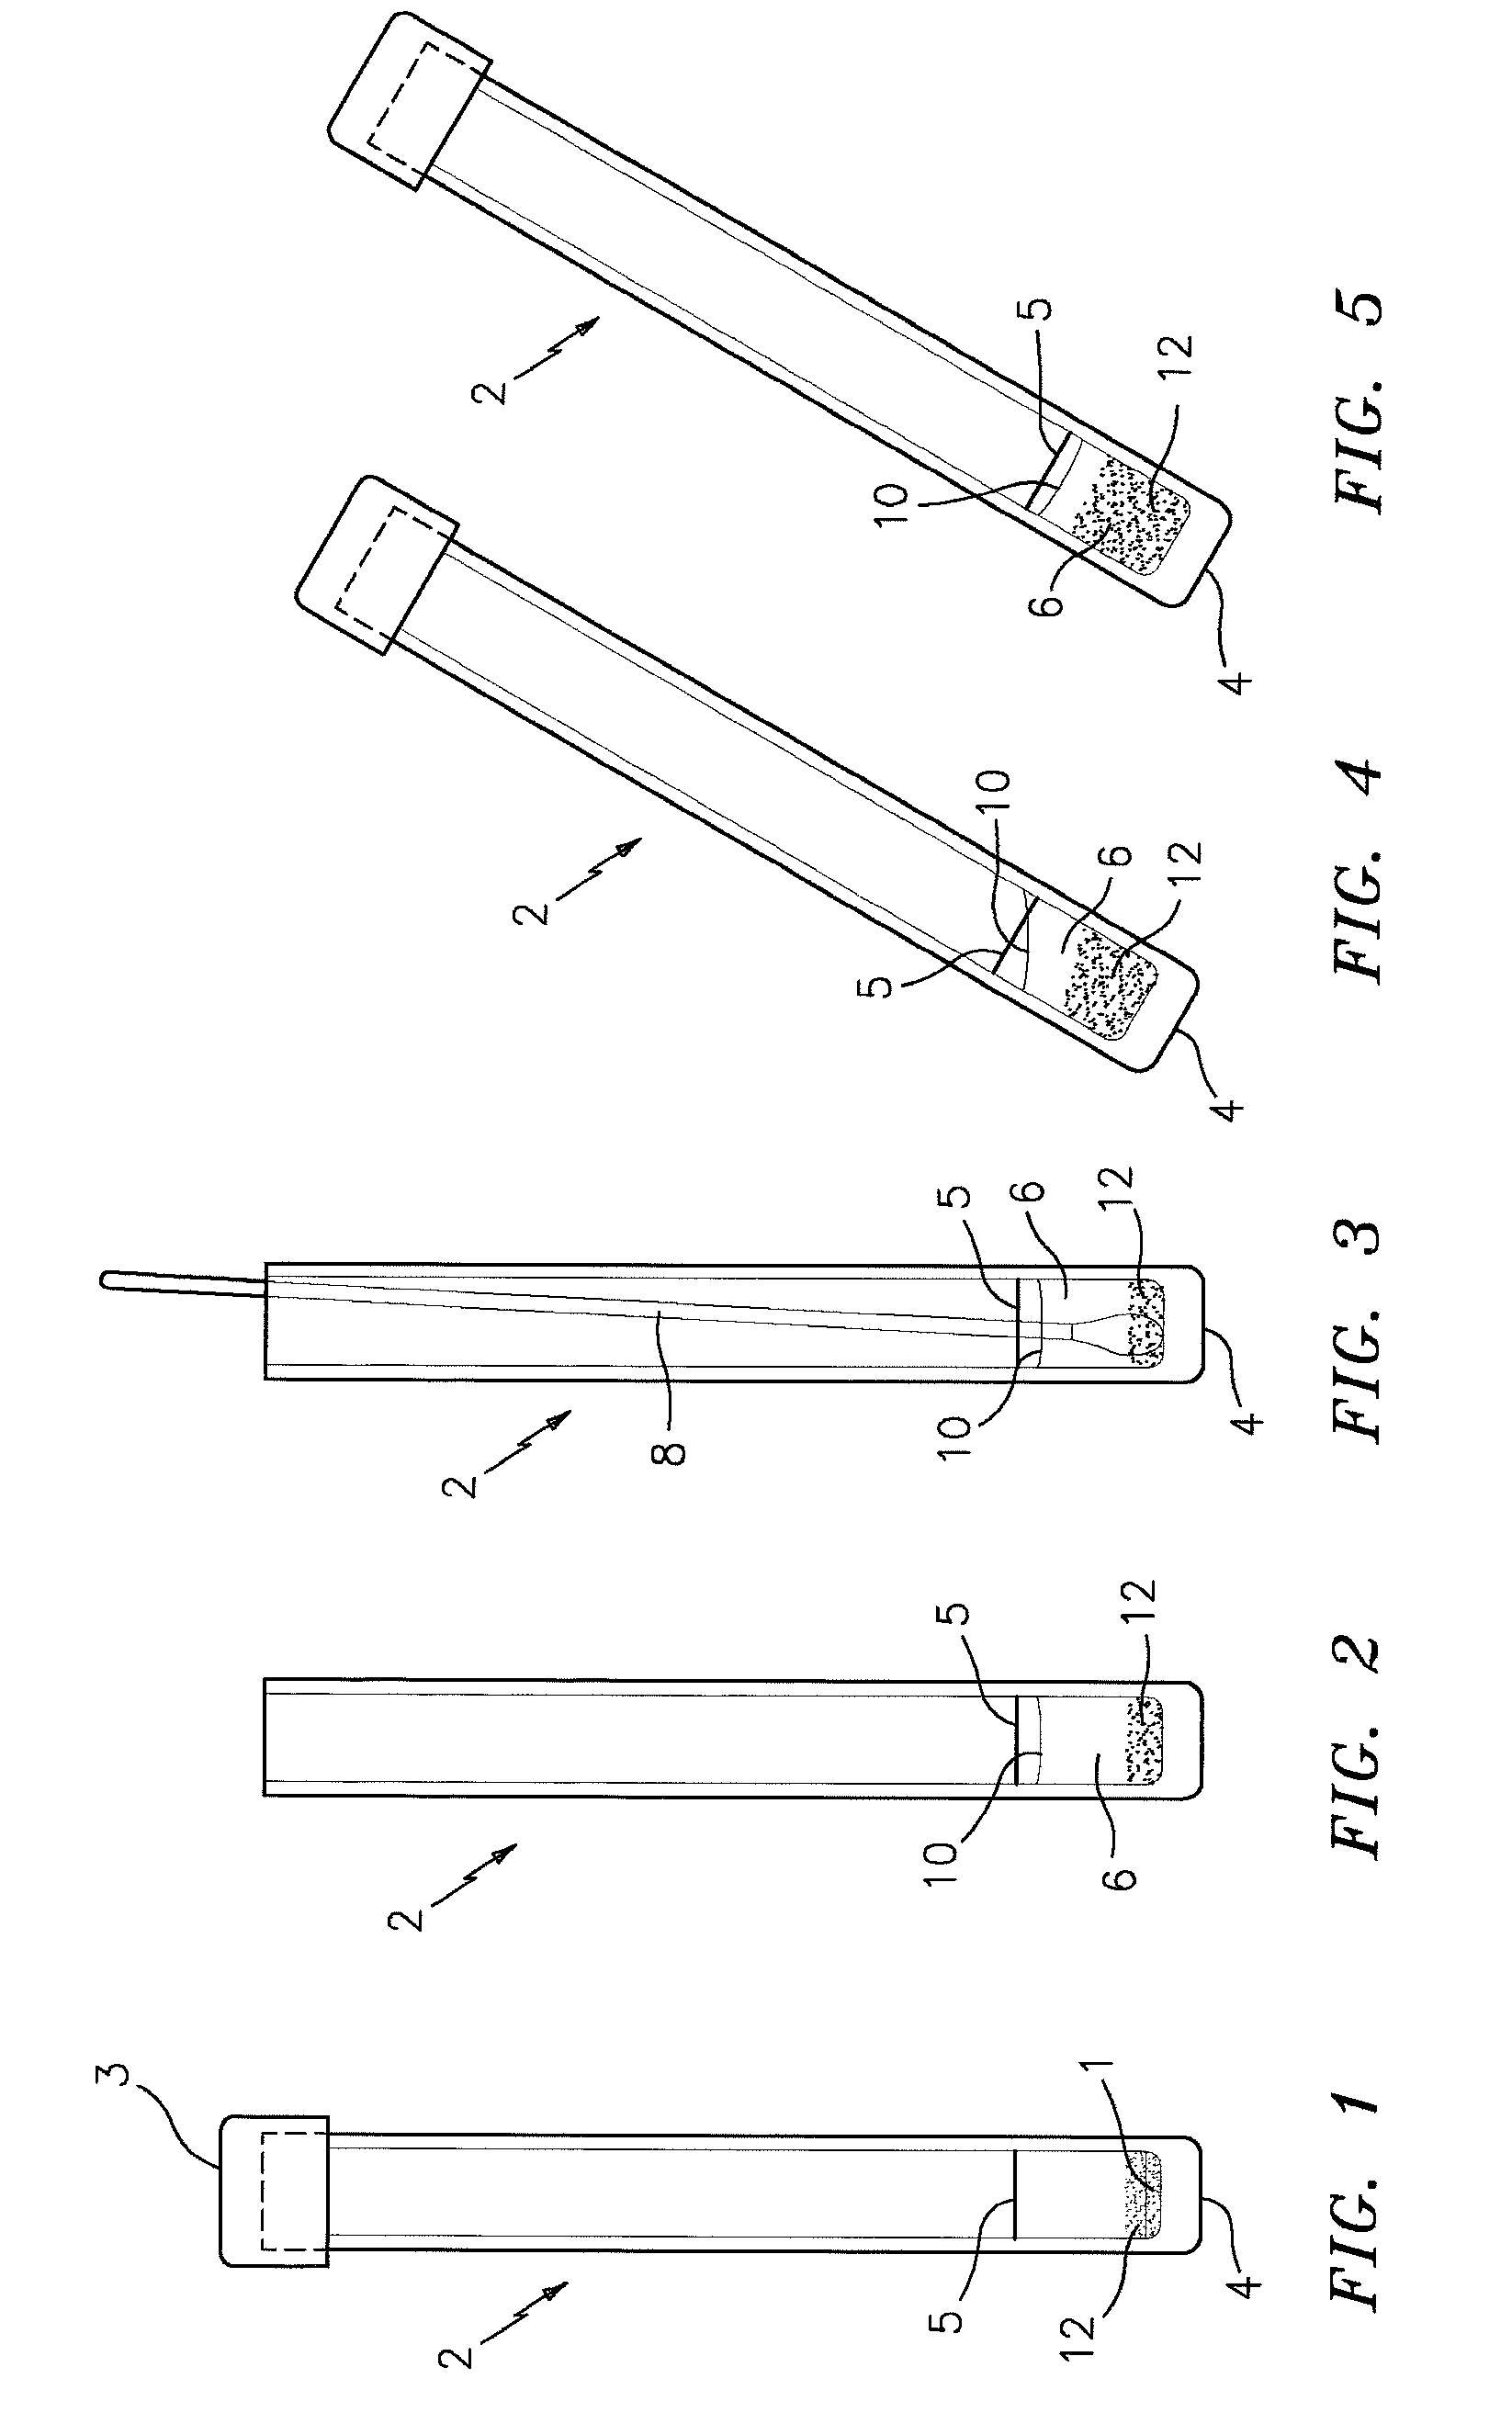 Method for detecting the presence or absence of pathogenic Staphylococci in a test sample, including test mixture with micro particles